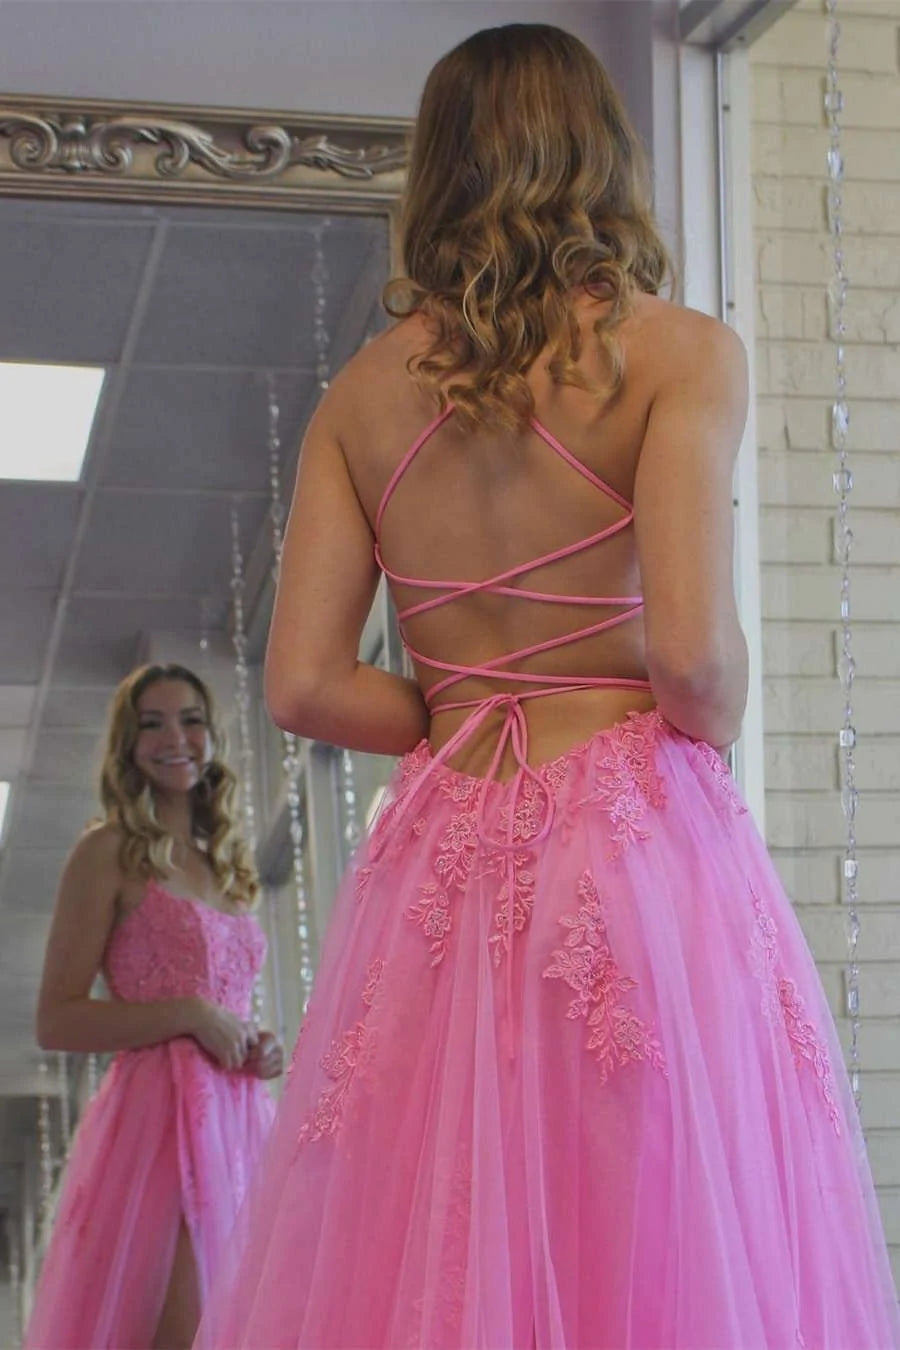 Strappy Back Pastel Pink Tulle Flounced Prom Dress - Xdressy